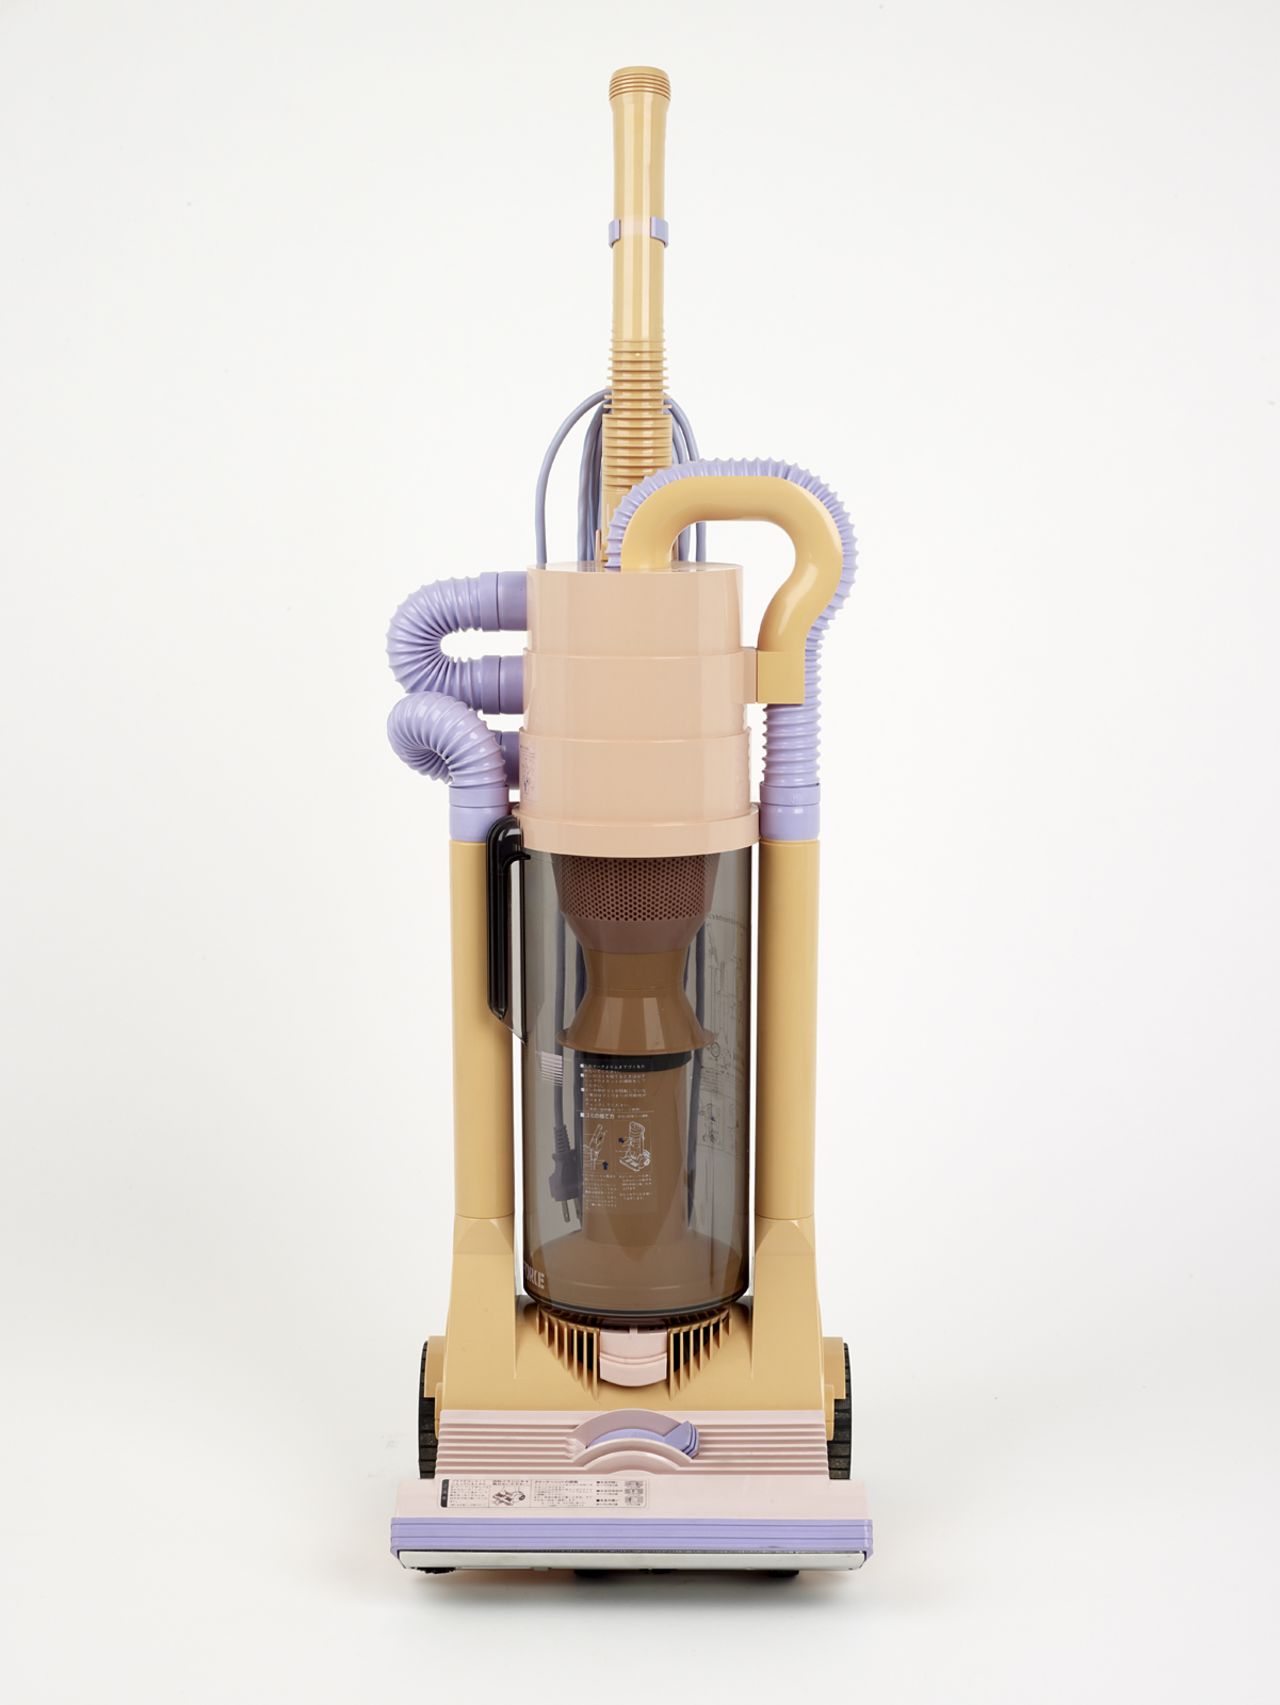 Frustrated by his vacuum cleaner's poor performance, James Dyson designed the Dual Cyclone in the 1980s. This bagless vacuum design featured what was billed as "cyclonic vacuum technology," which was proudly displayed in the Dual Cyclone's striking transparent body.